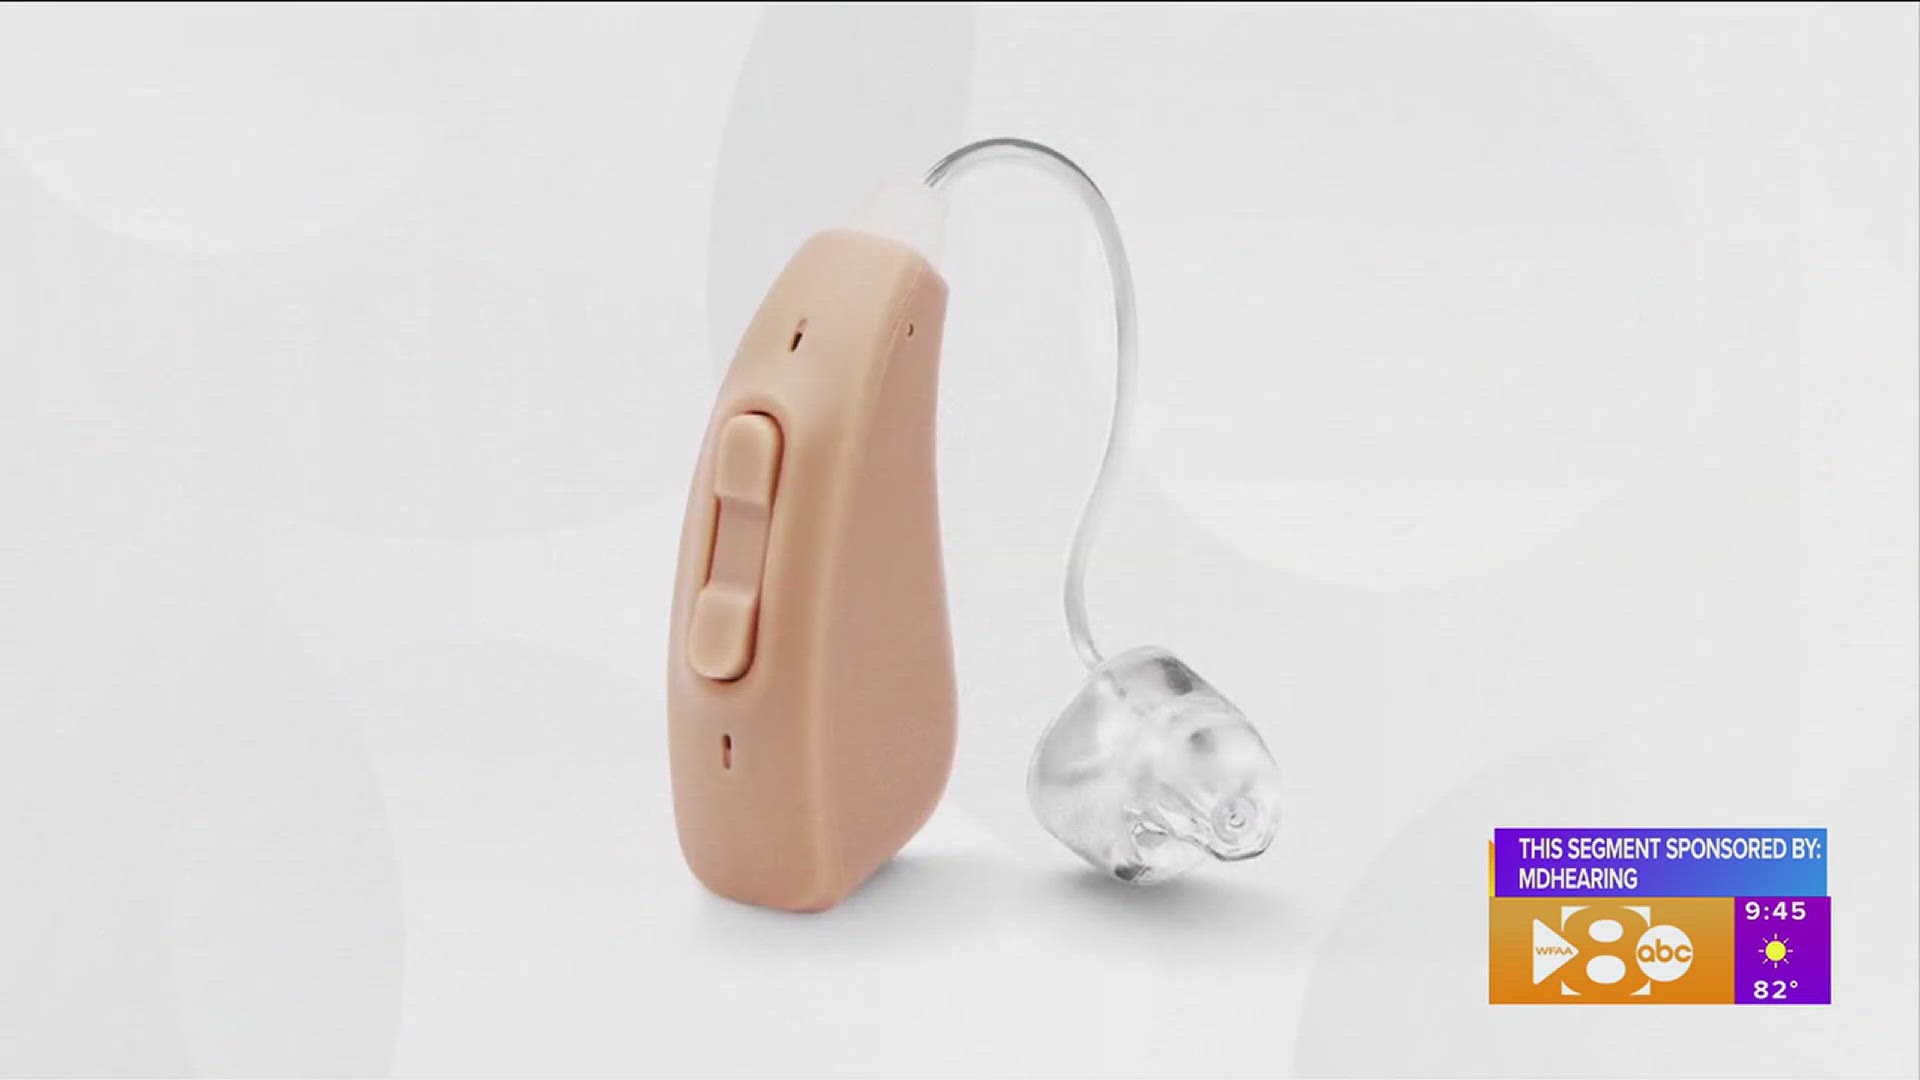 New technology makes hearing aids smaller & more affordable. This segment is sponsored by MD Hearing. Call 1.800.935.6875 or go to trymdhearing.com for more info.